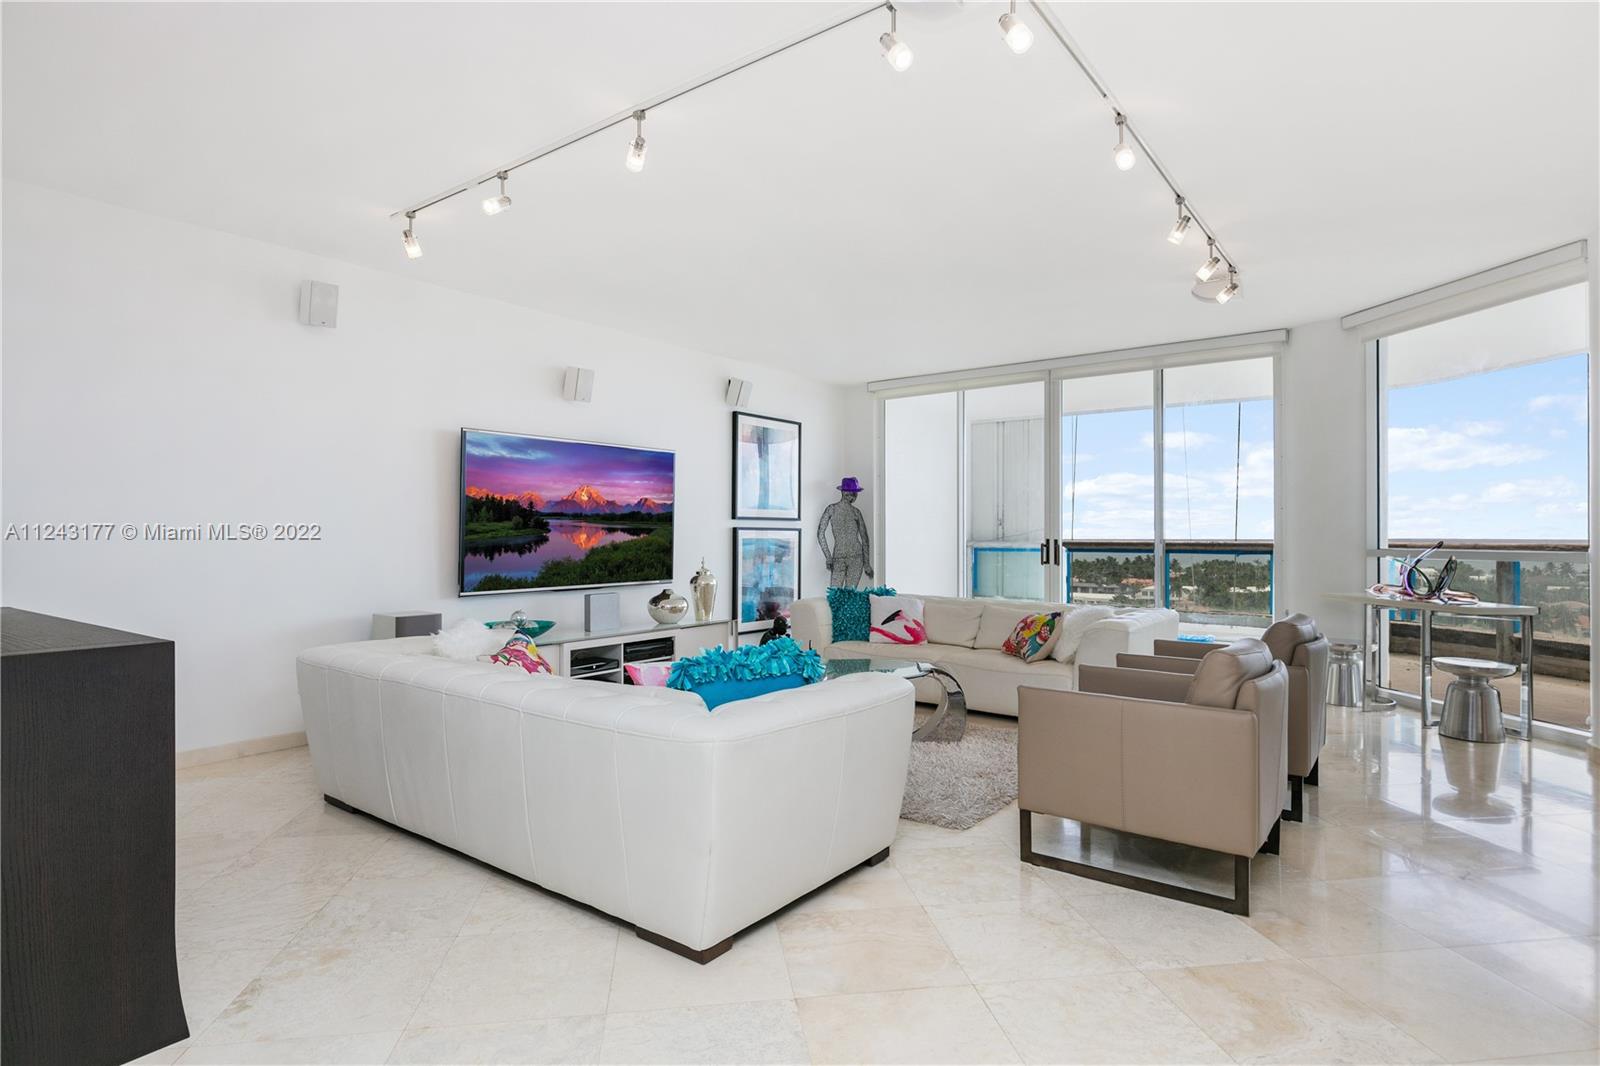 Photo 1 of Atlantic II At The Point Apt 1204 in Aventura - MLS A11243177